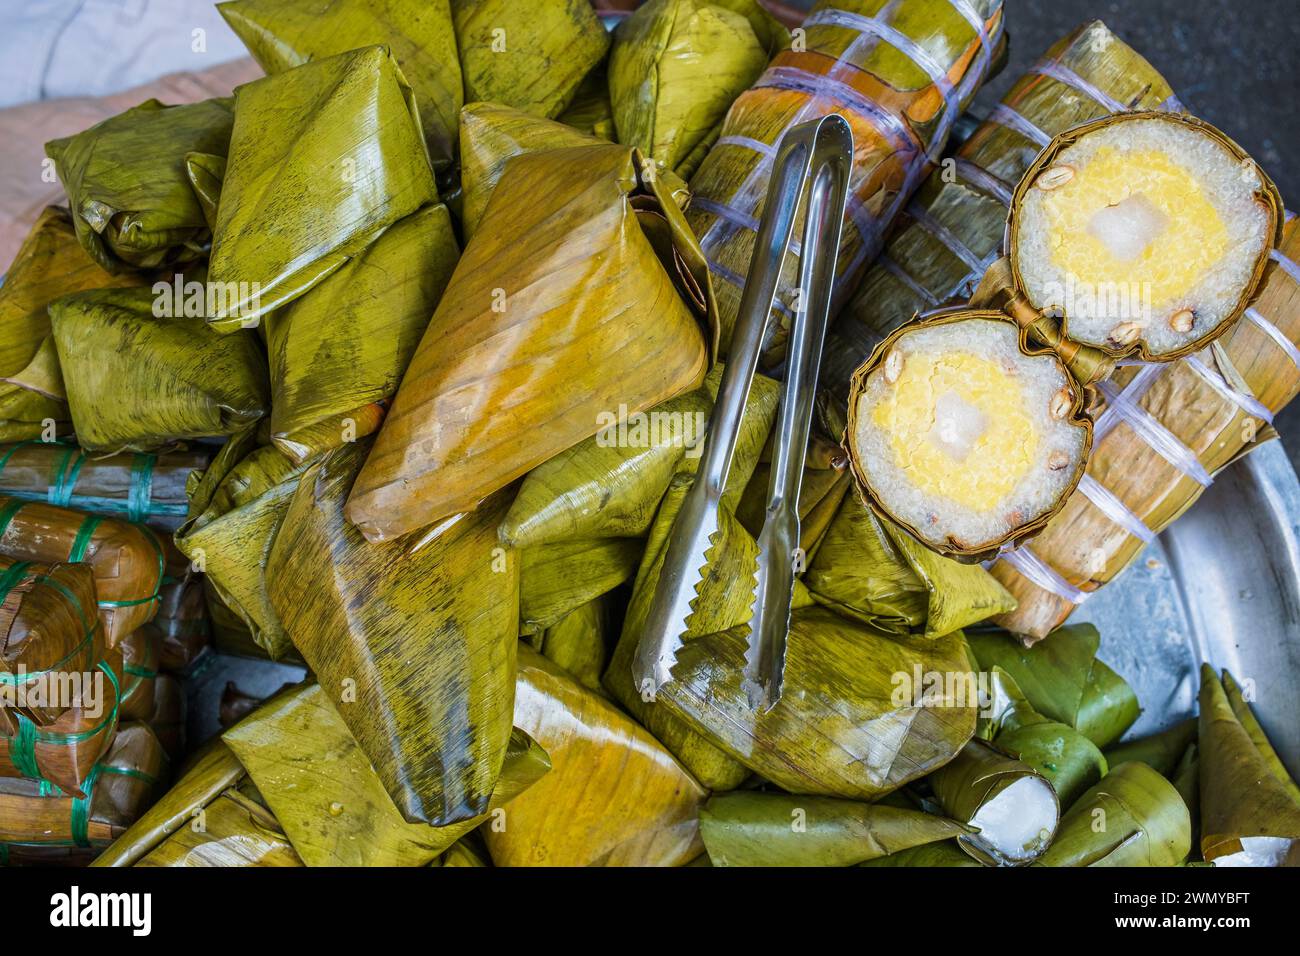 Vietnam, Mekong Delta, Cai Rang district, the land market of Cai Rang, specialties of sticky rice and coconut cooked in banana leaves Stock Photo